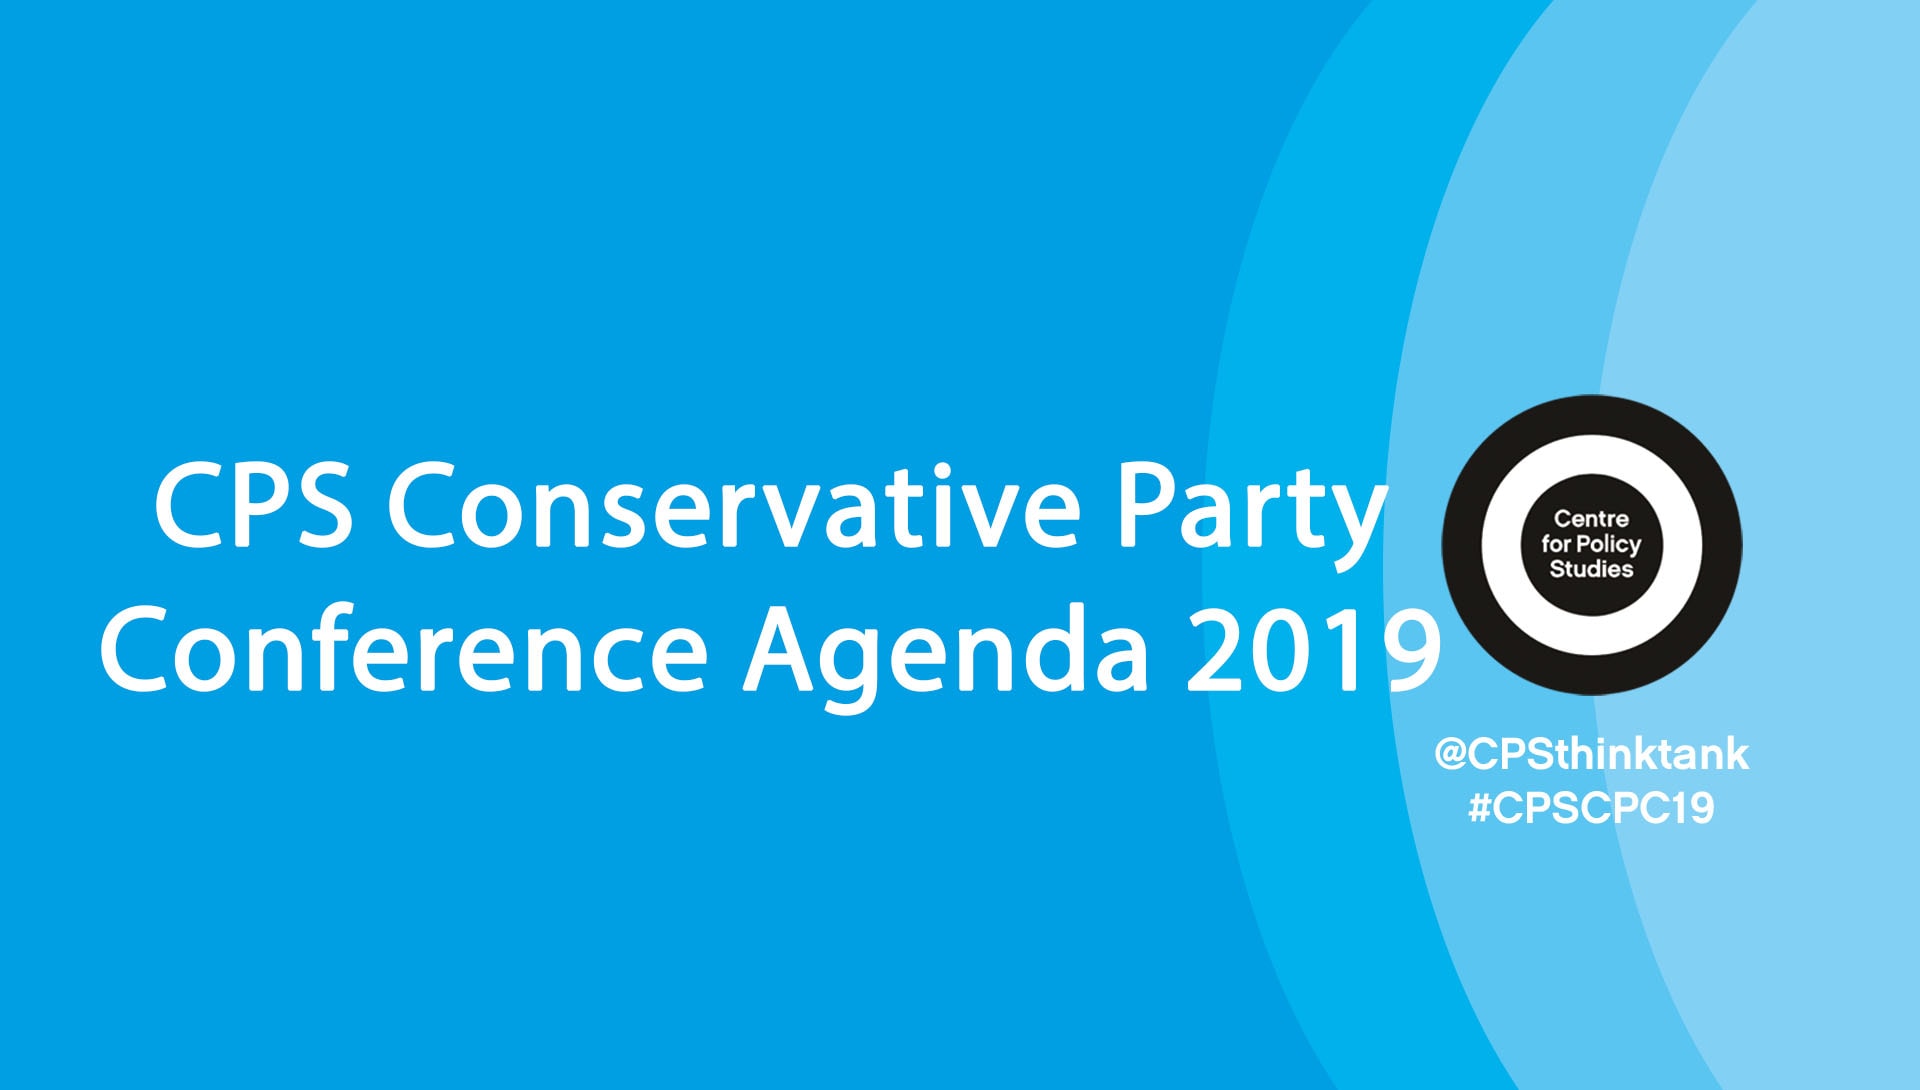 CPS Conservative Party Conference Agenda 2019 The Centre for Policy